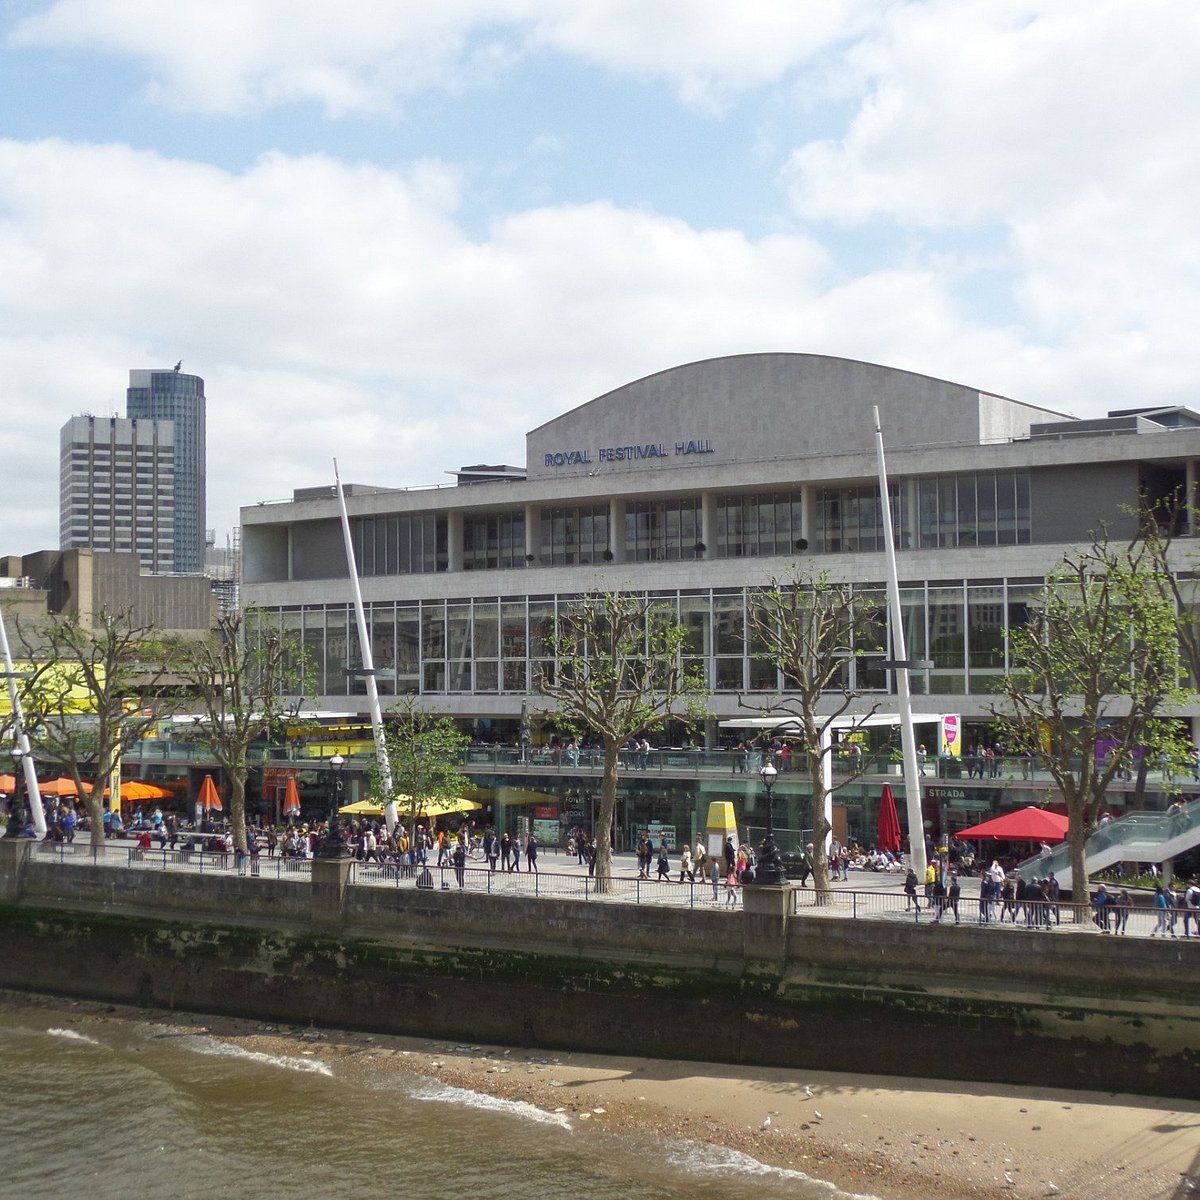 Royal Festival Hall (London) All You Need to Know BEFORE You Go